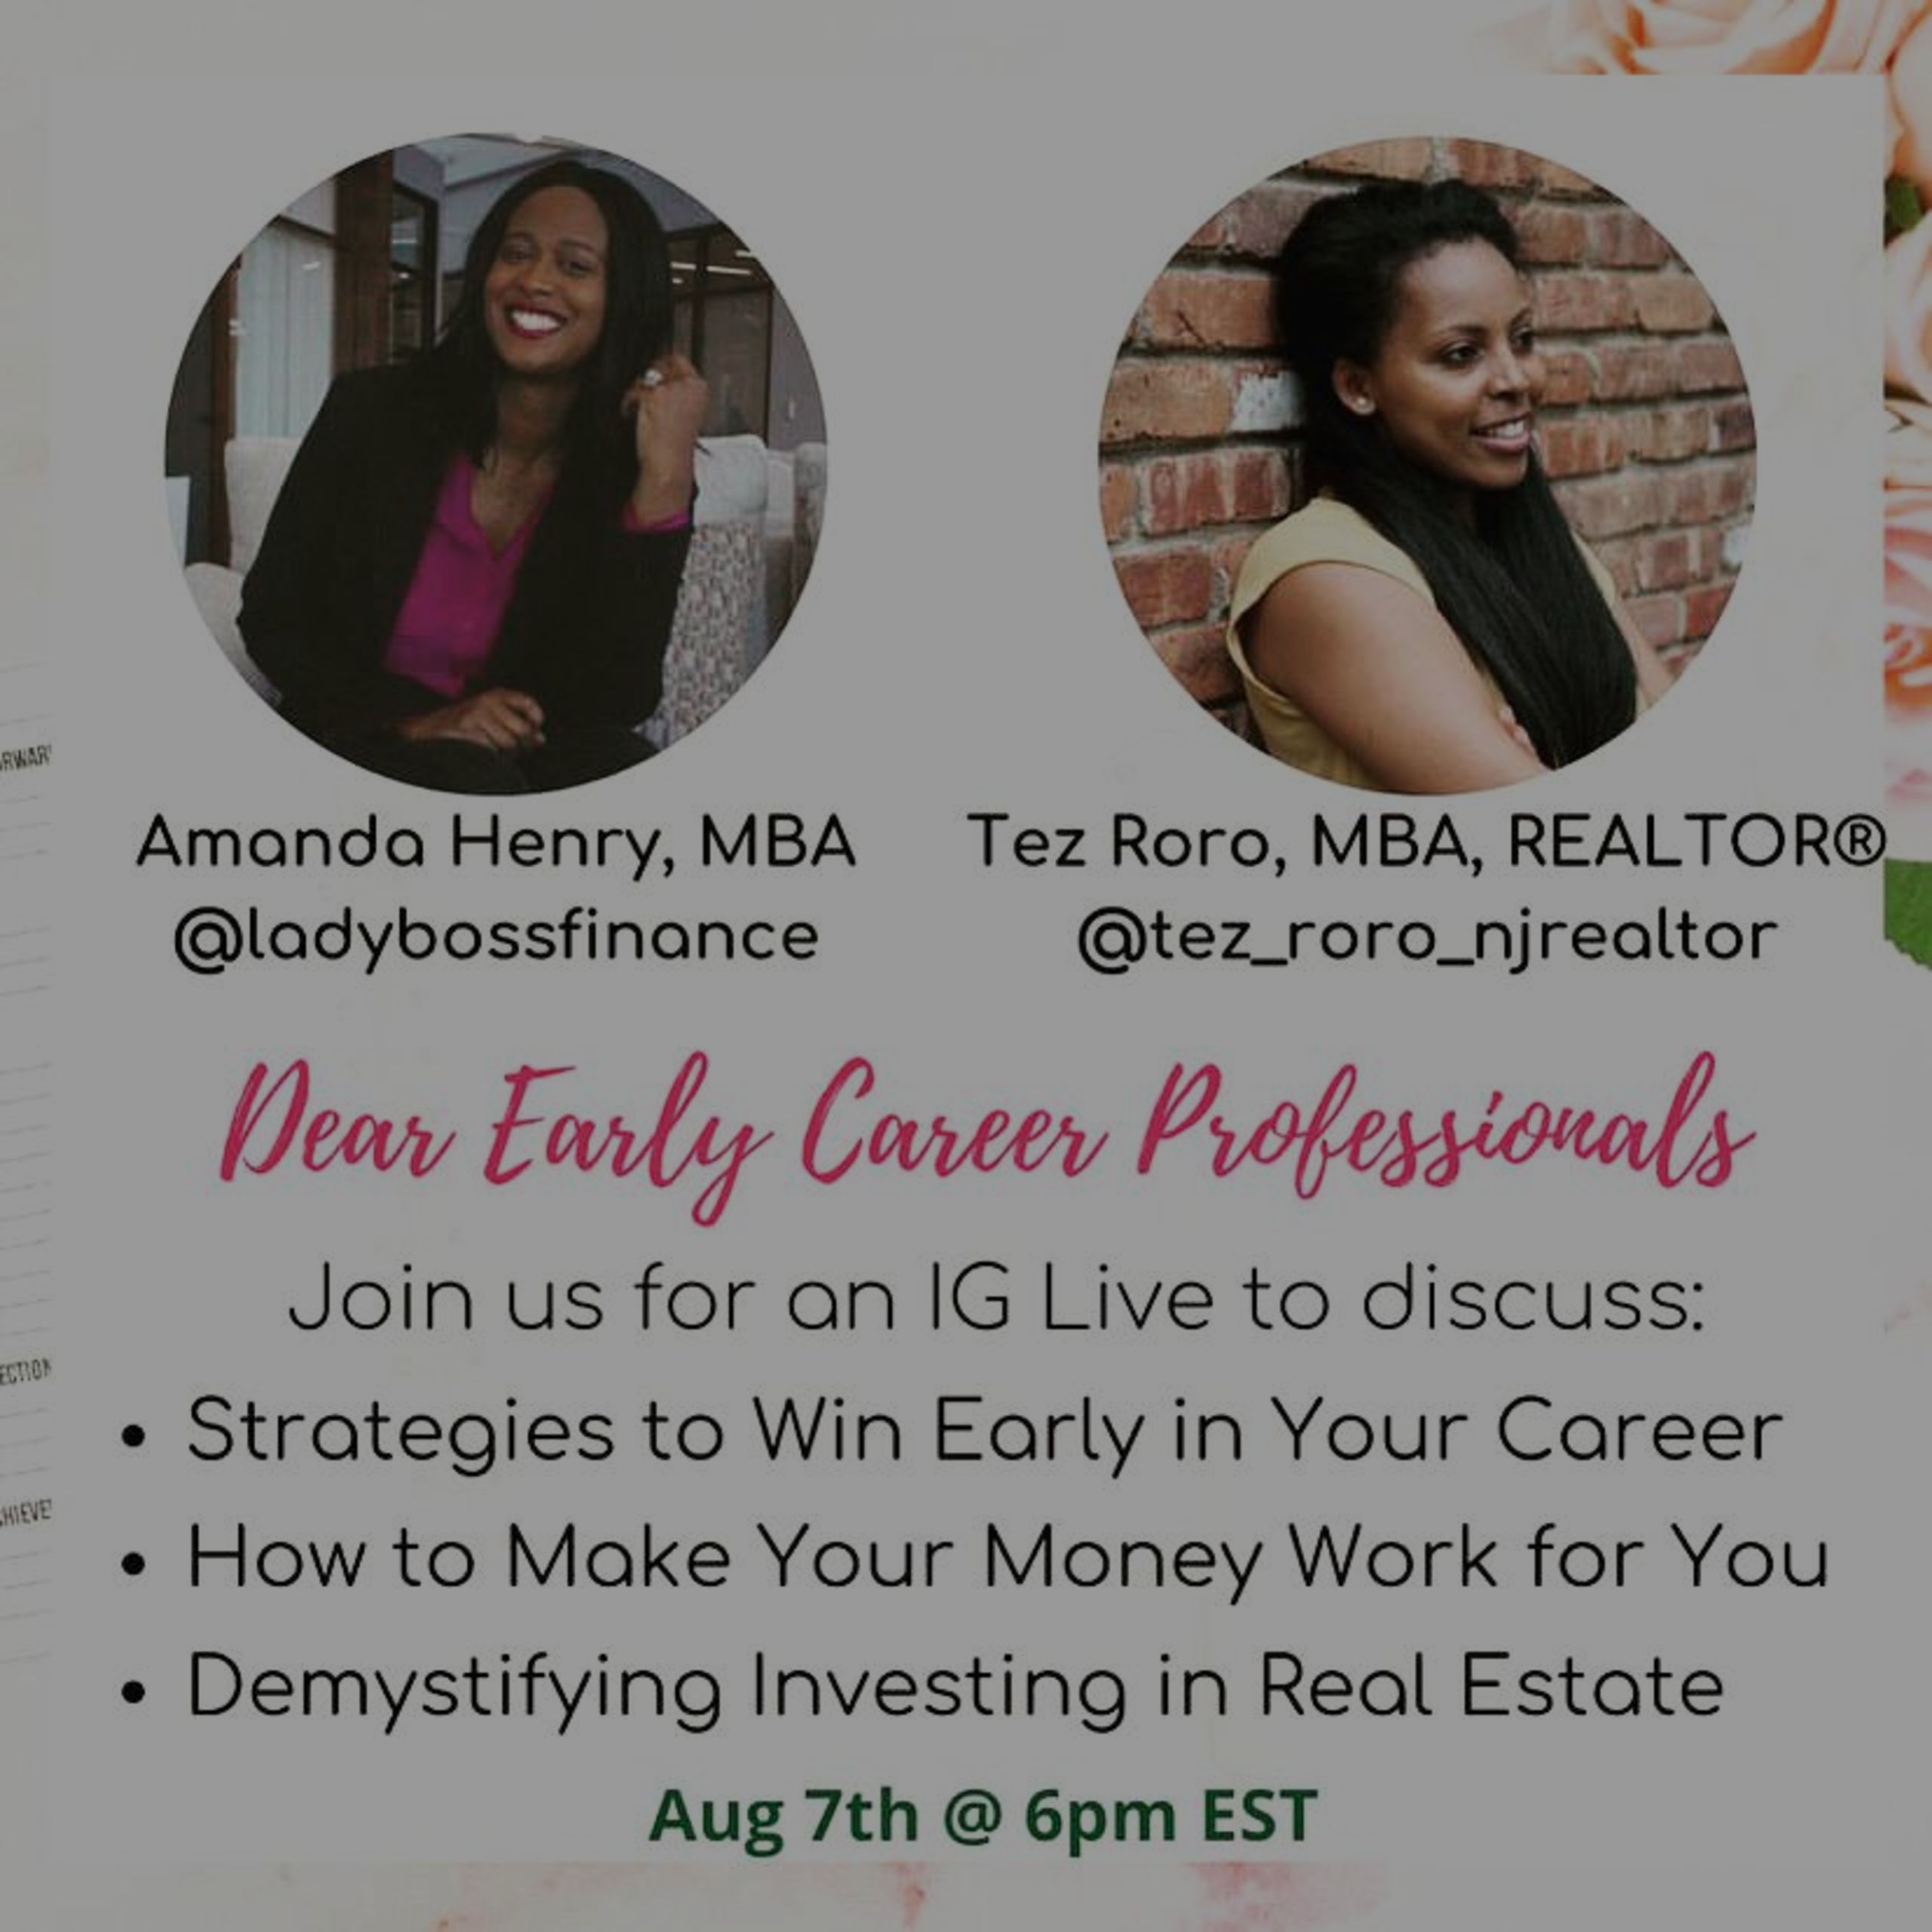 IG live on Career, Money and Real Estate 8/7!